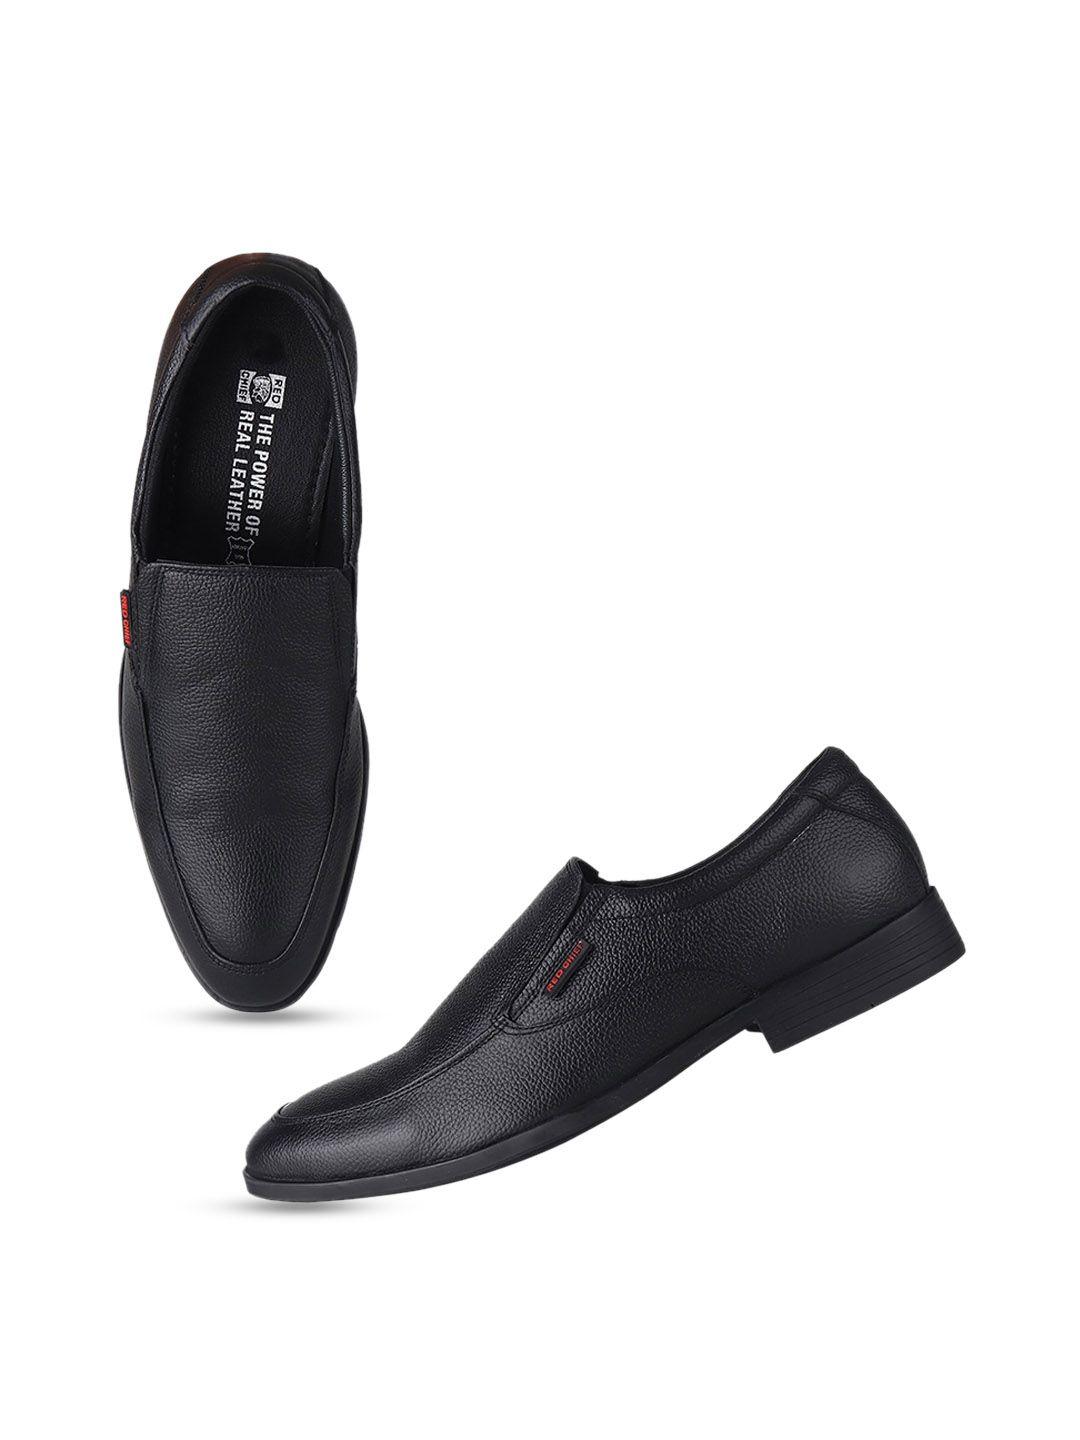 red-chief-men-textured-leather-formal-slip-on-shoes